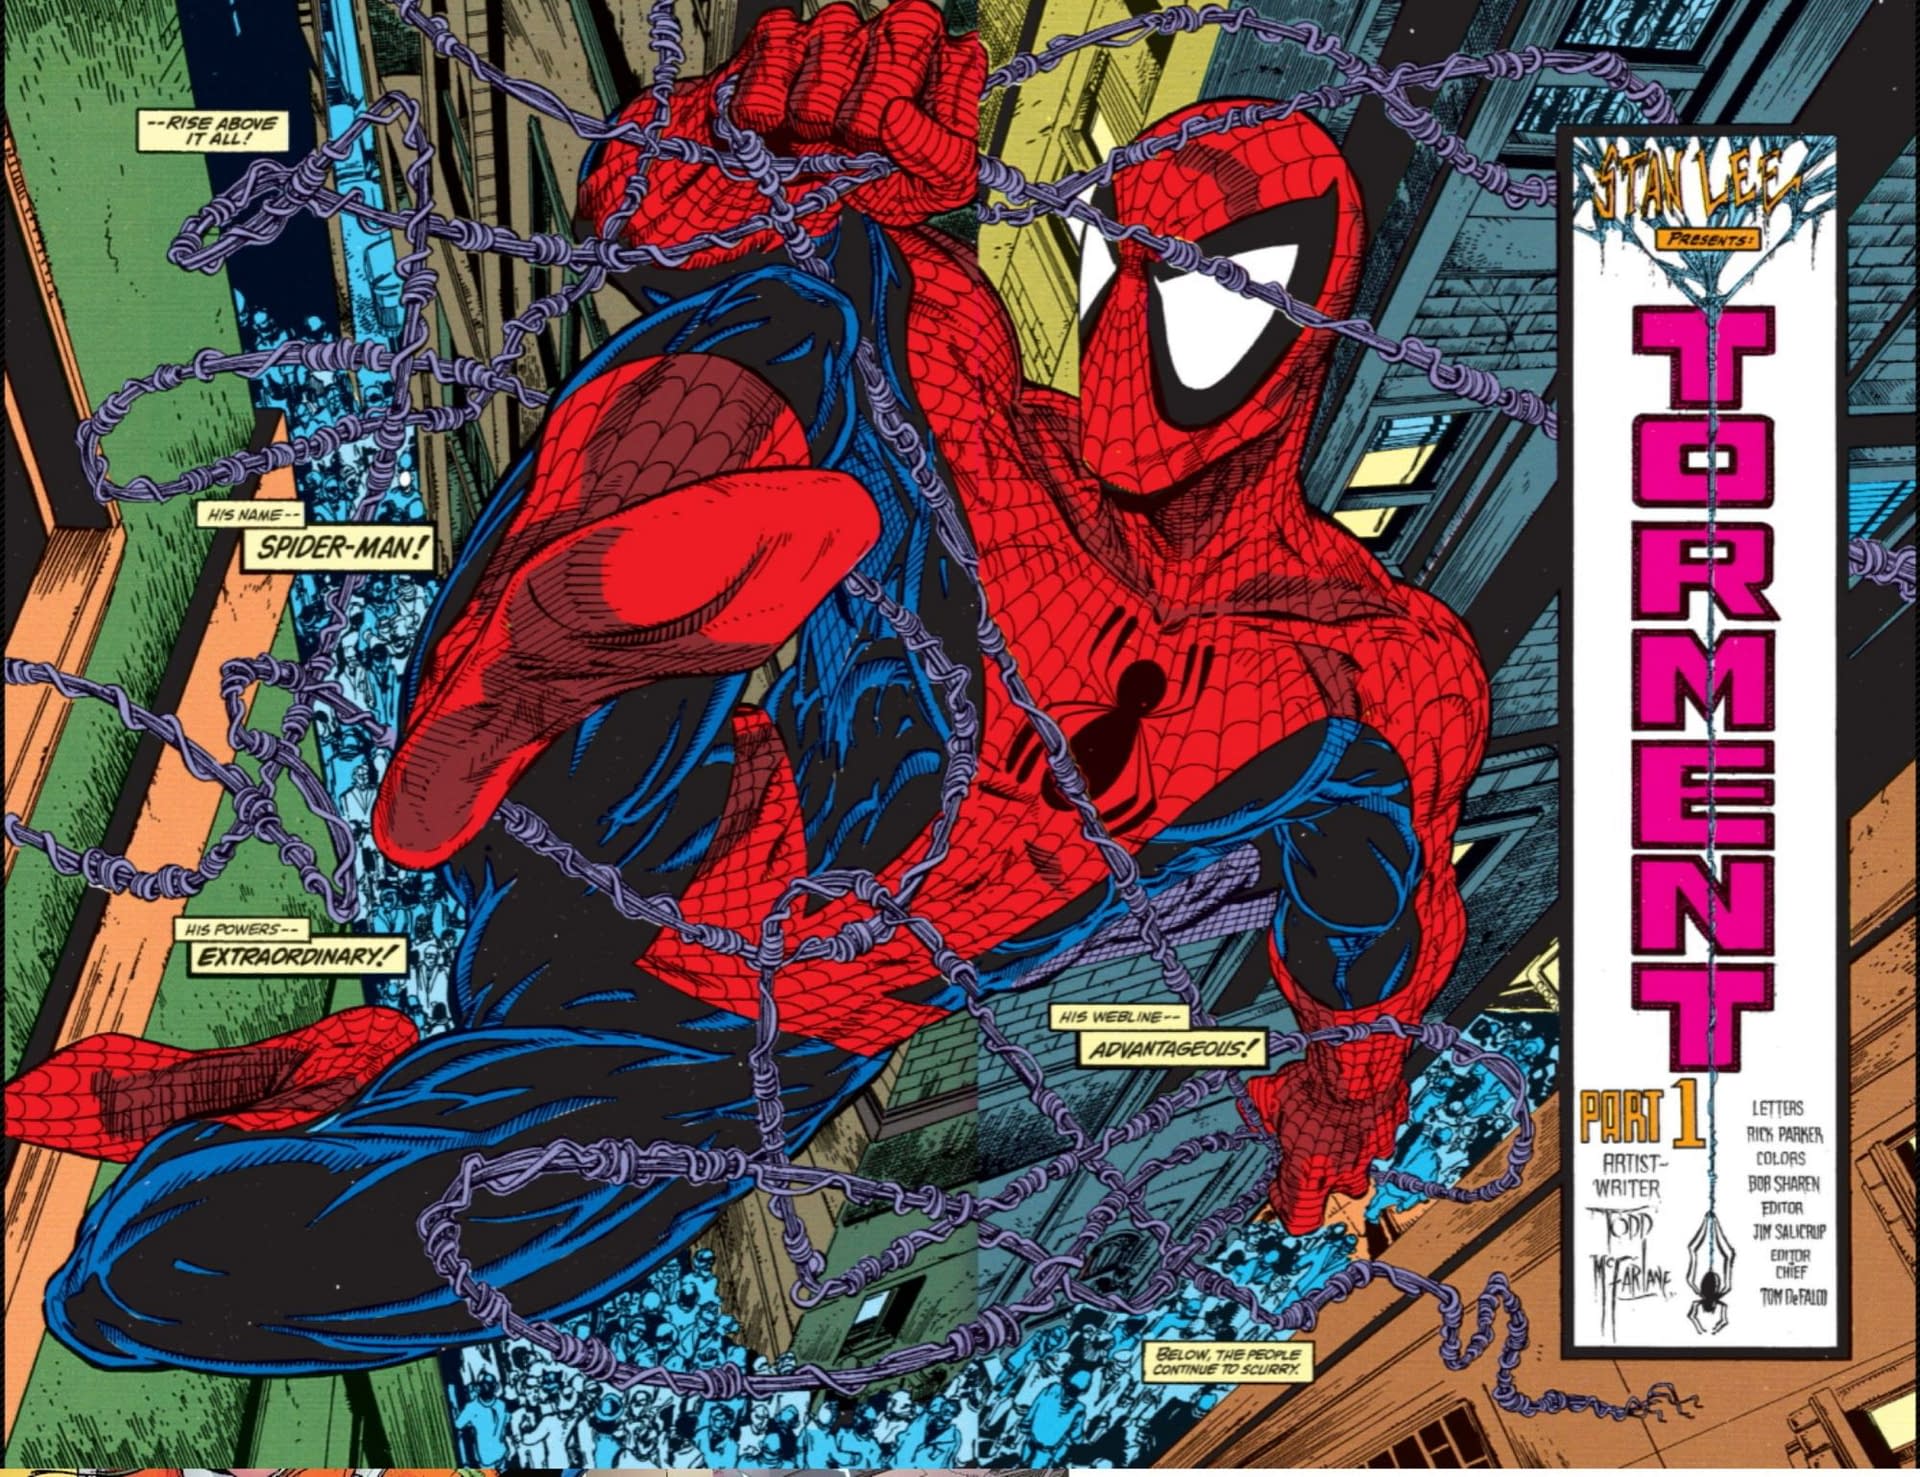 Todd McFarlane On Spider-Man #1 Artwork He Is Not Selling... Yet